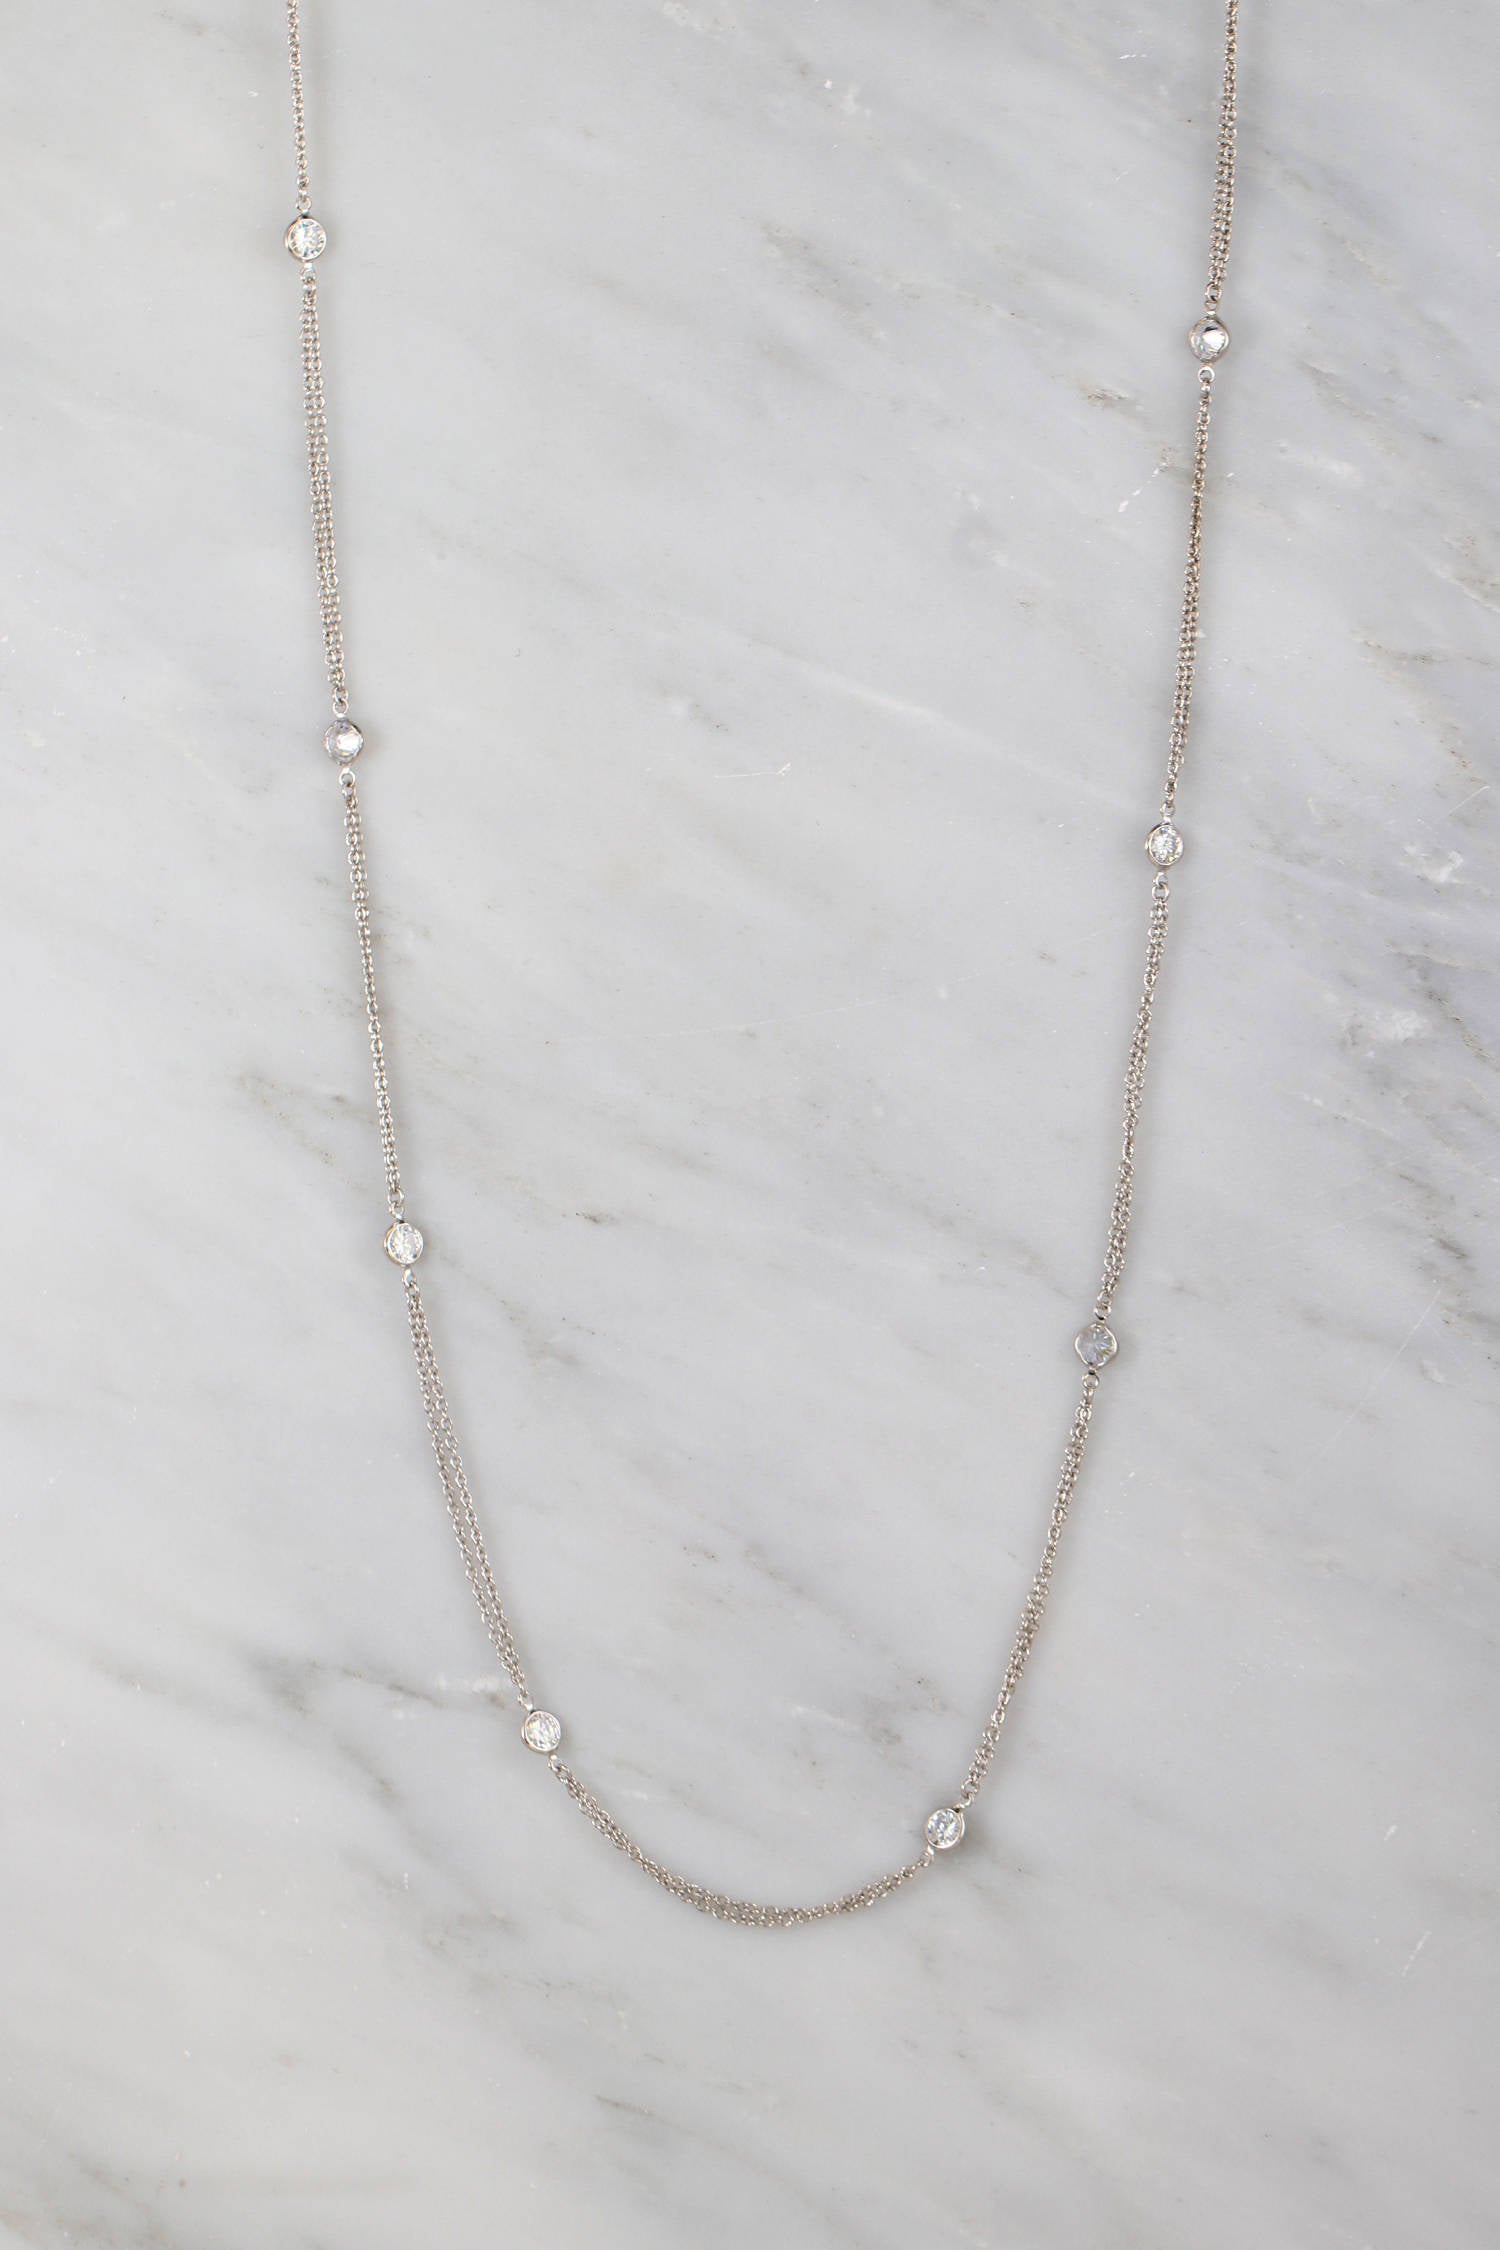 Sterling Silver Necklace, Multi Layered Necklace, Clear Quartz Long Chain Necklace, Crystal Quartz Necklace, Perfect Necklace for Summer